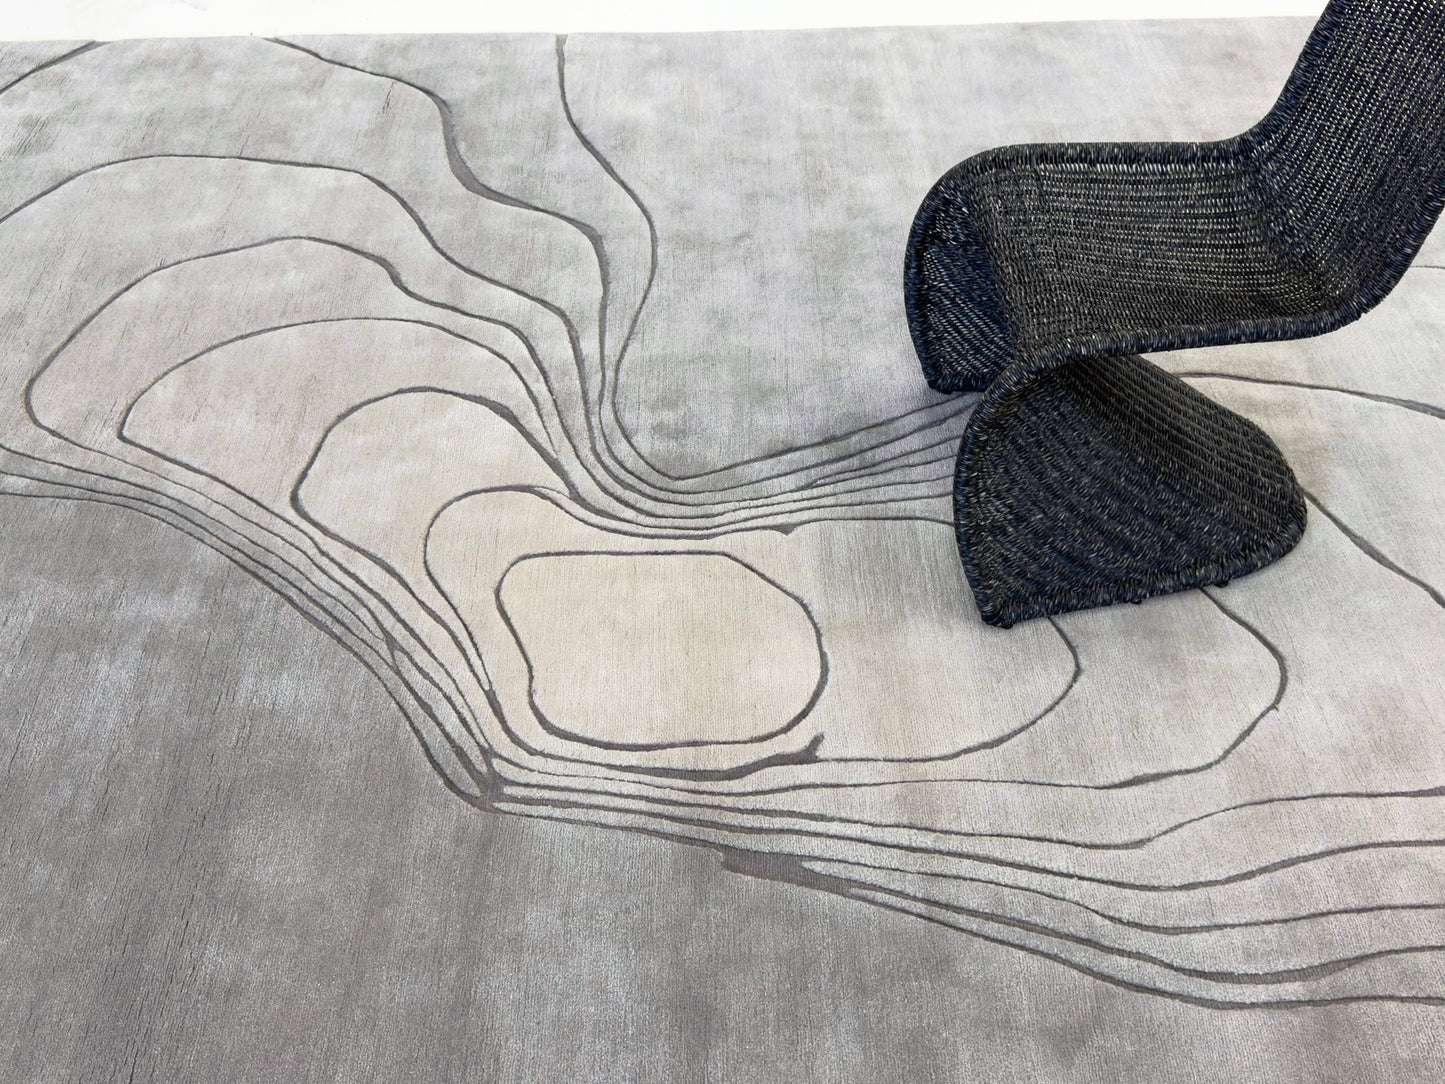 Modern Rug Image 2917 Echoes by Claudia Afshar